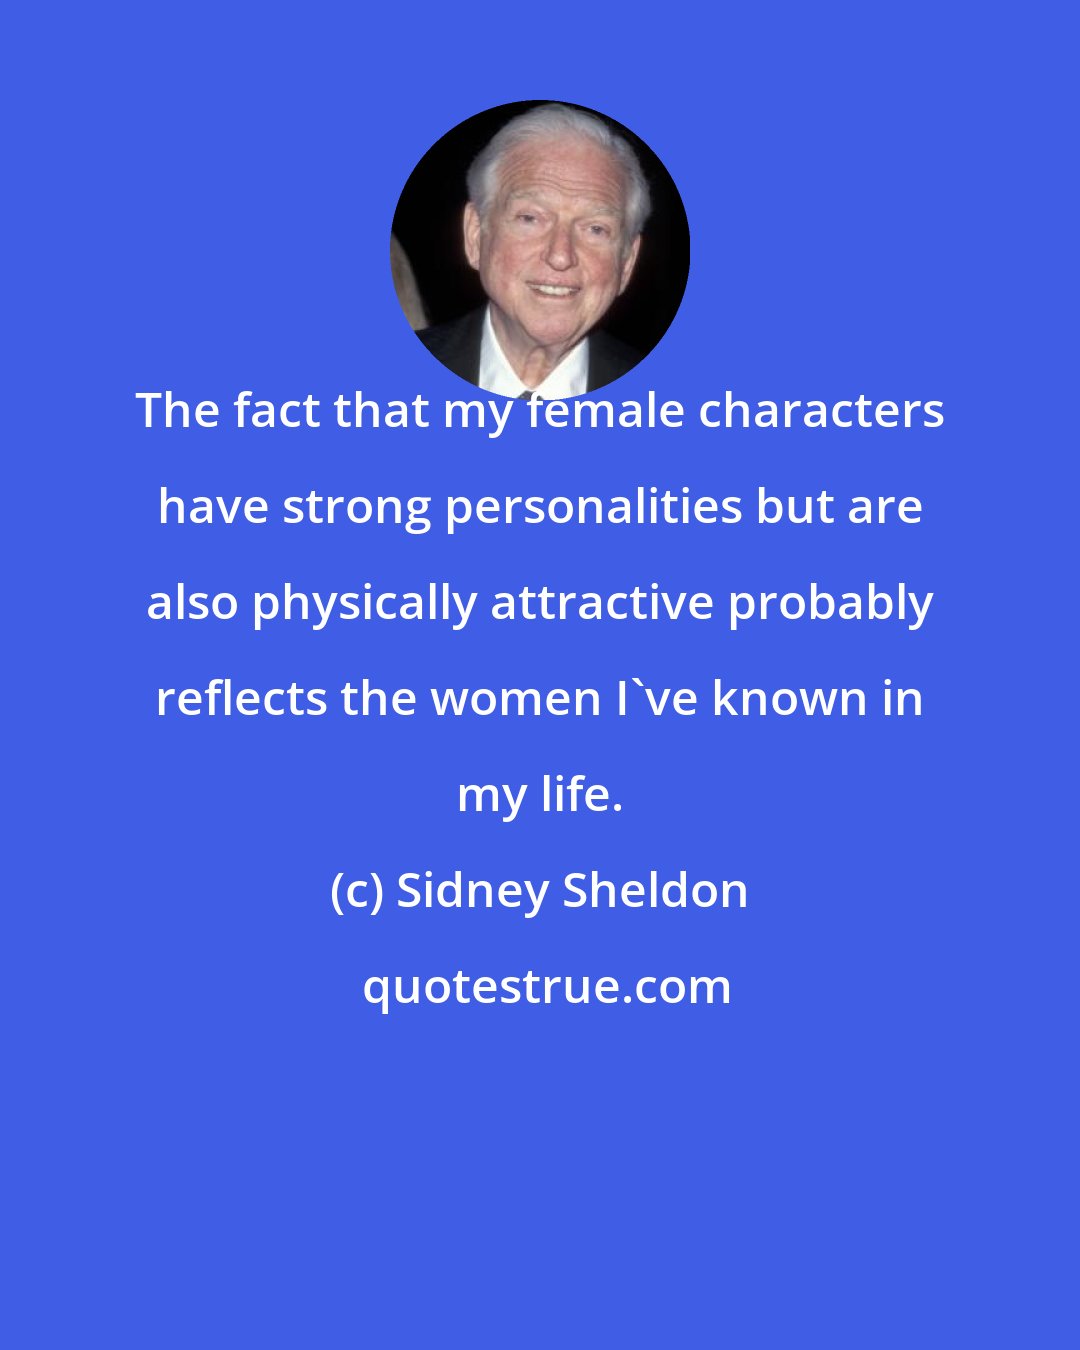 Sidney Sheldon: The fact that my female characters have strong personalities but are also physically attractive probably reflects the women I've known in my life.